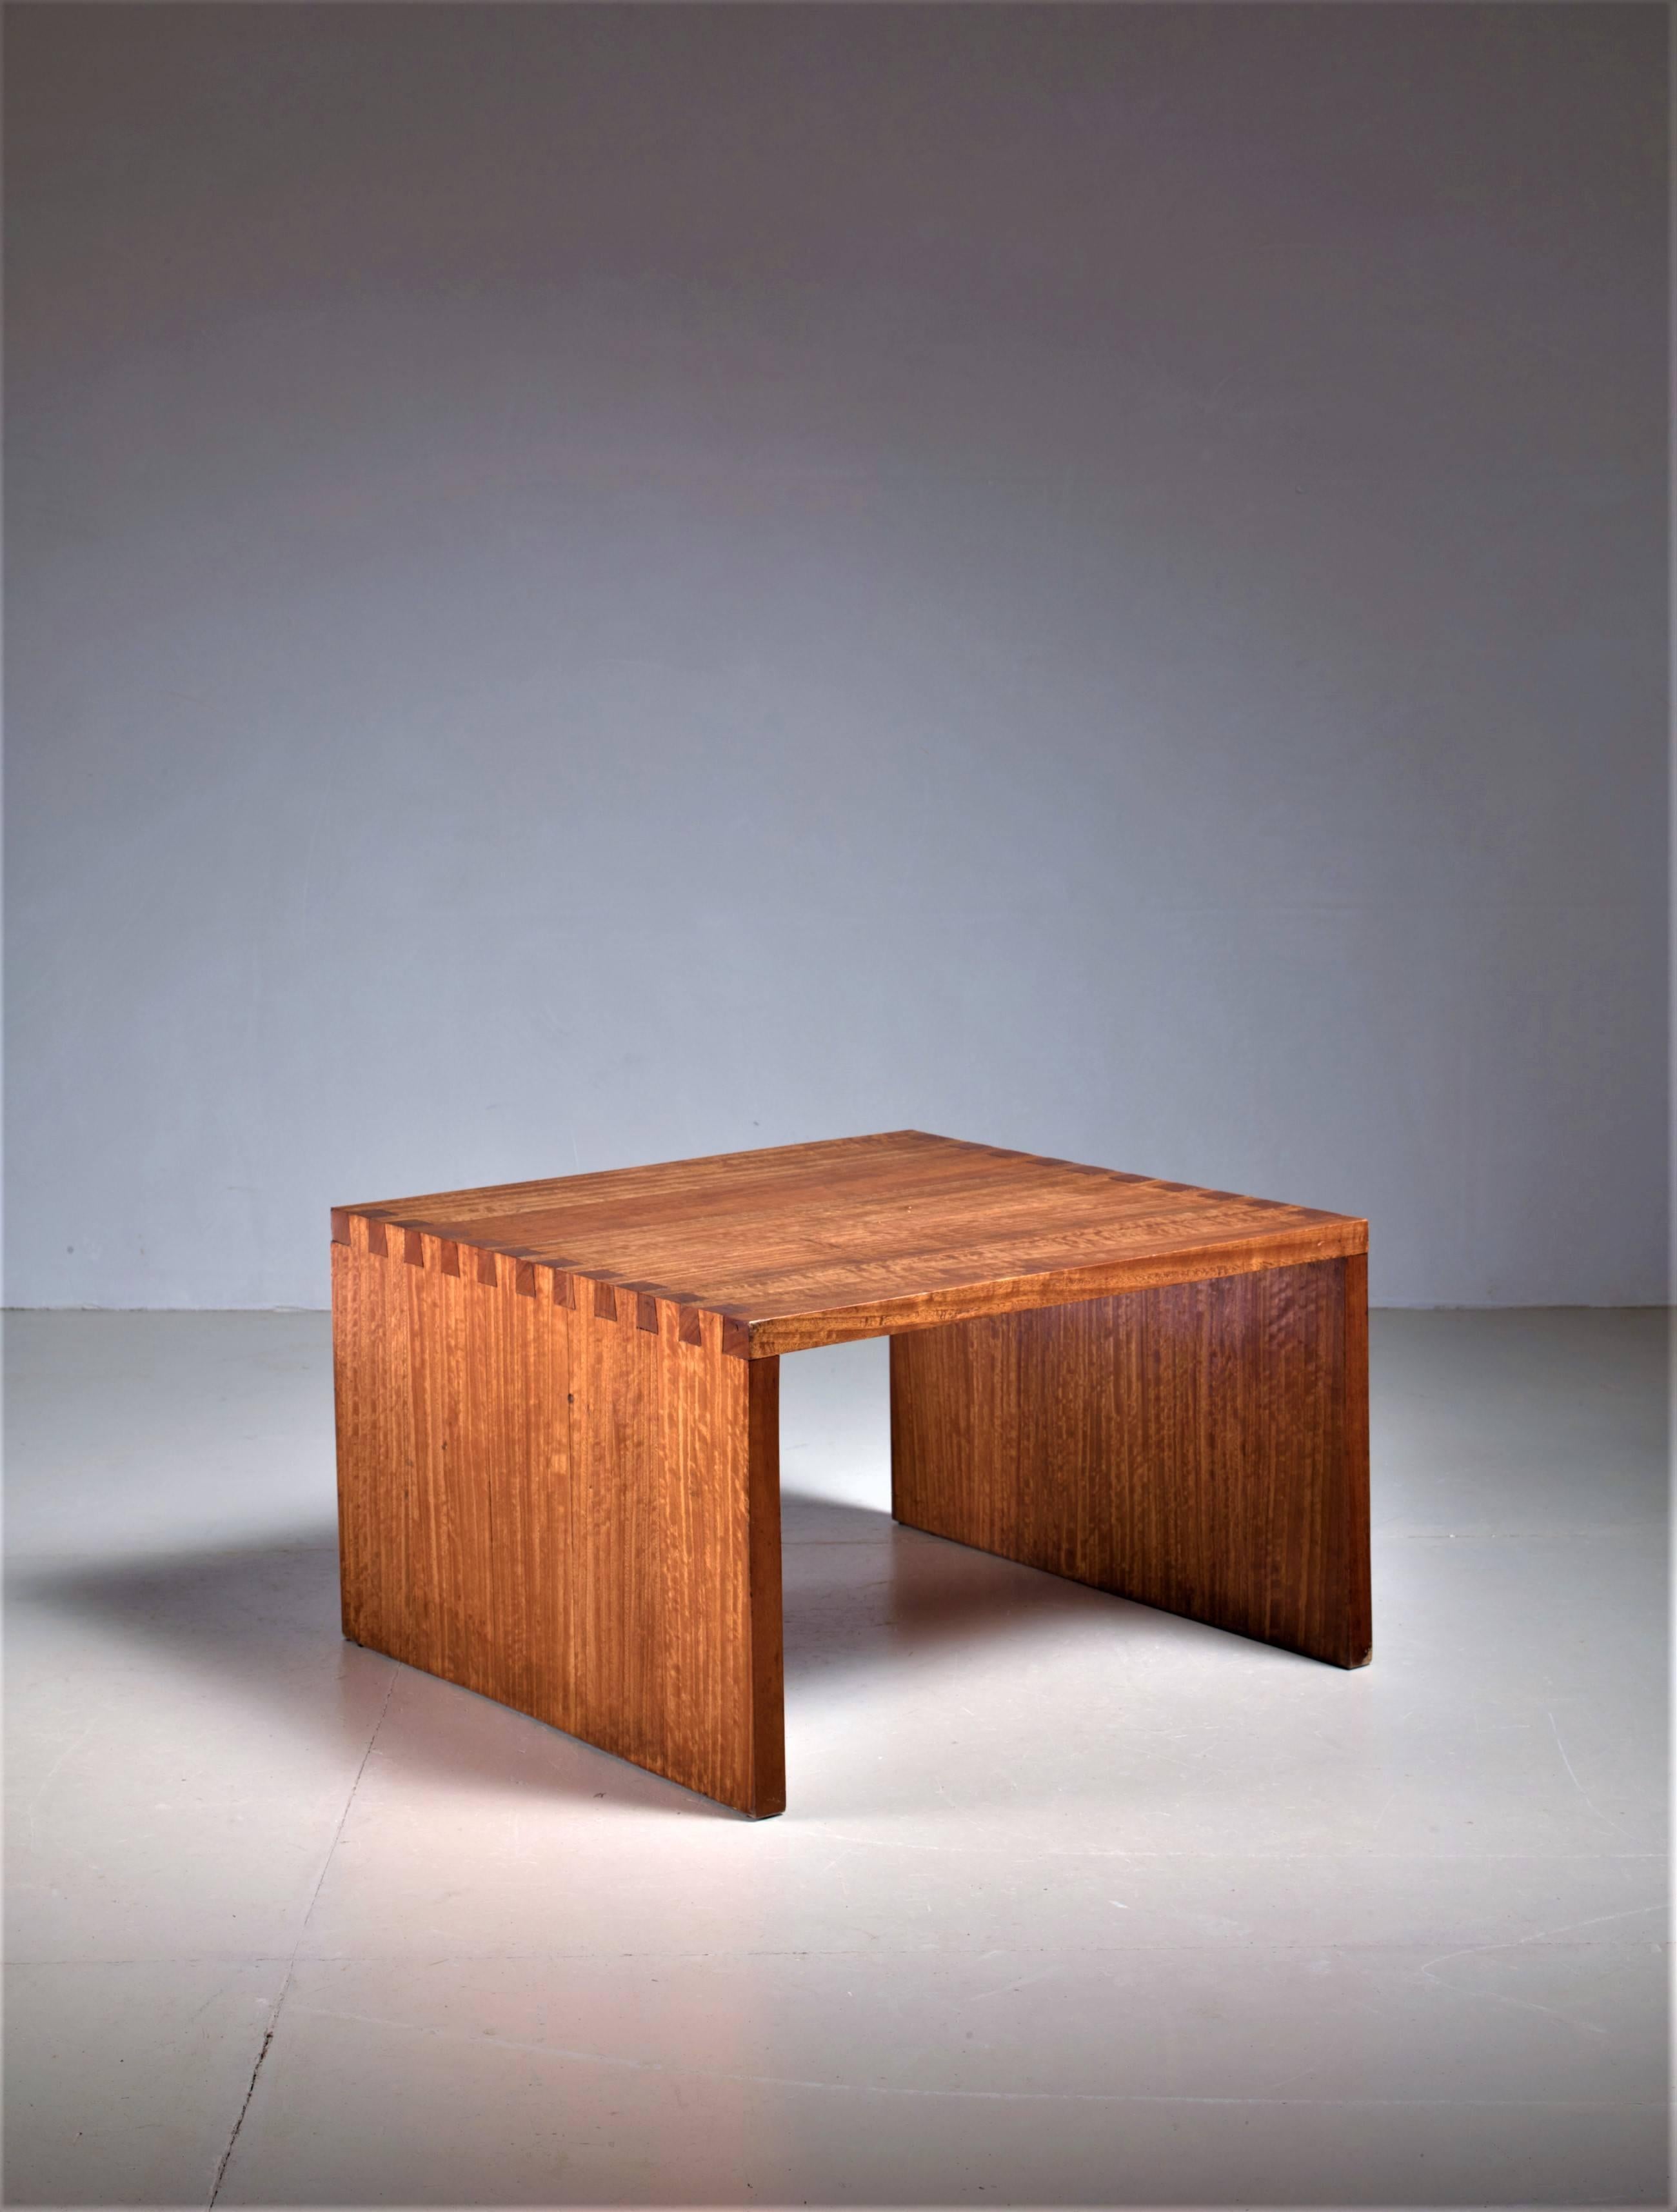 A wonderfully made side table in solid citrus wood. Beautiful connections and a warm patina. Caillette grew up amongst wood, as his father was a woodworker. 
For René-Jean the combination of functionality and simplicity created the most beautiful